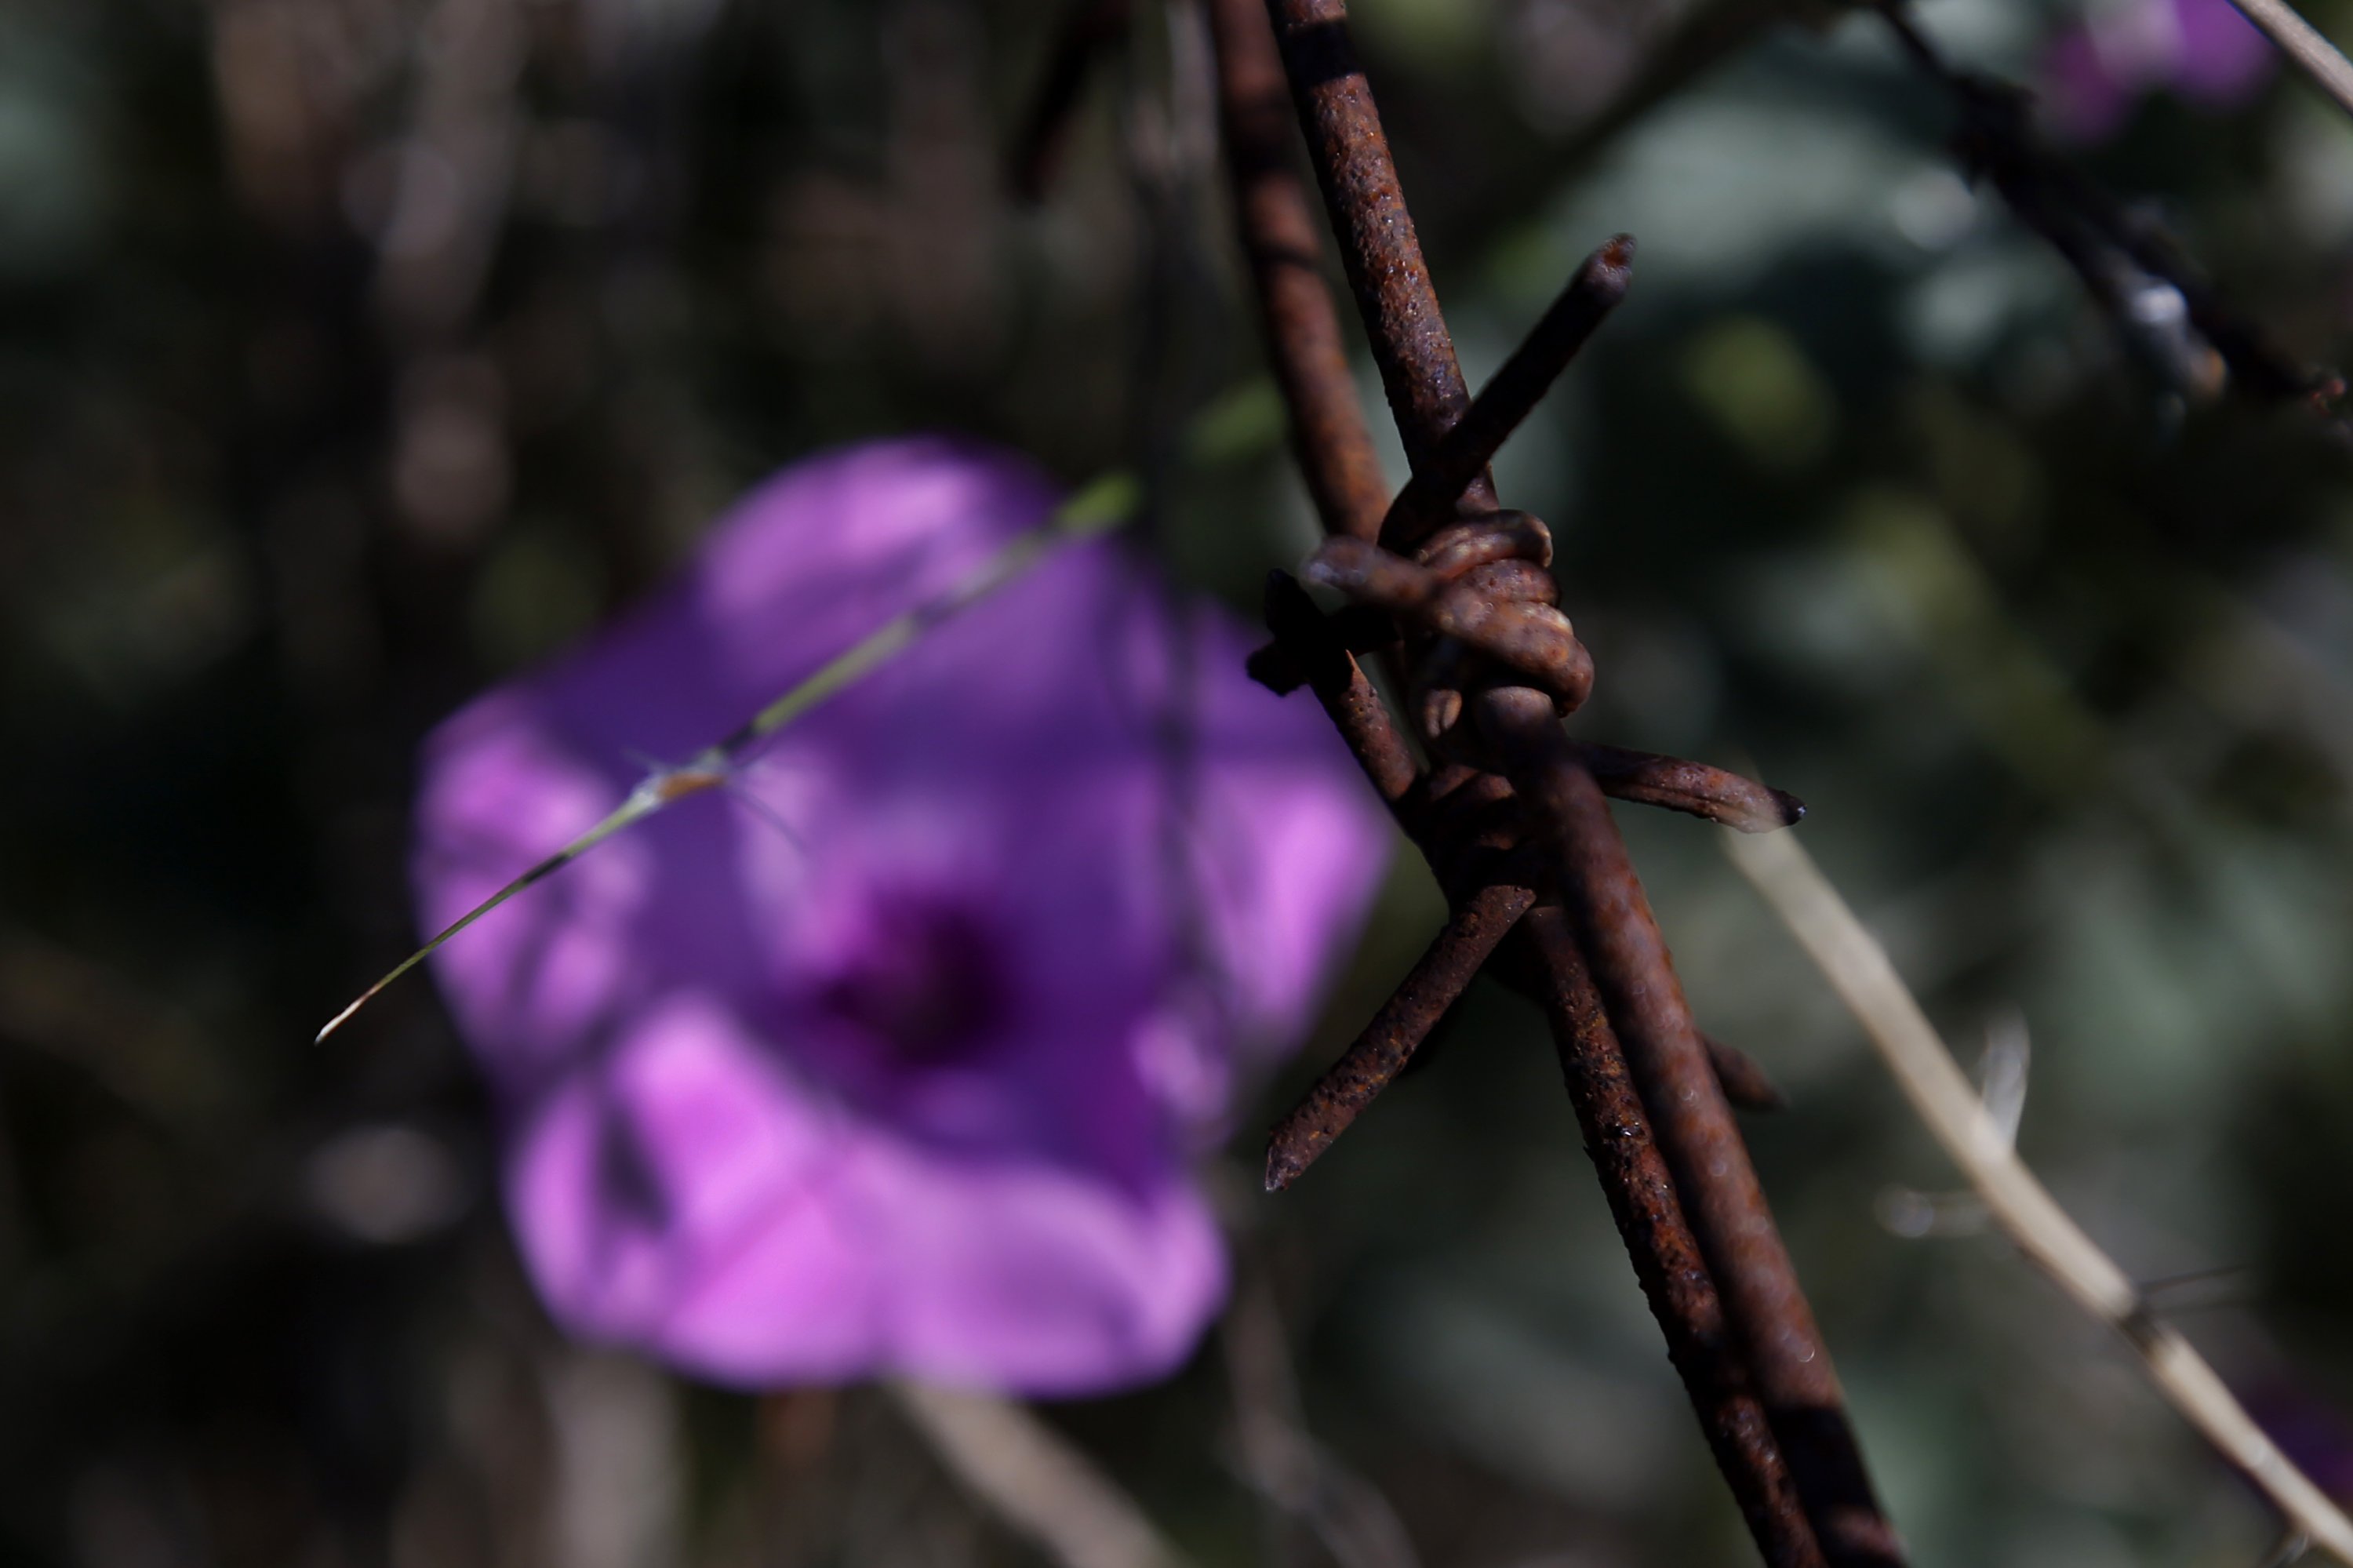 A wildflower is seen through barbed wire inside the U.N.-controlled buffer zone that divides the Greek-controlled south and the Turkish-controlled north, on the island of Cyprus, March 26, 2021. (AP Photo)